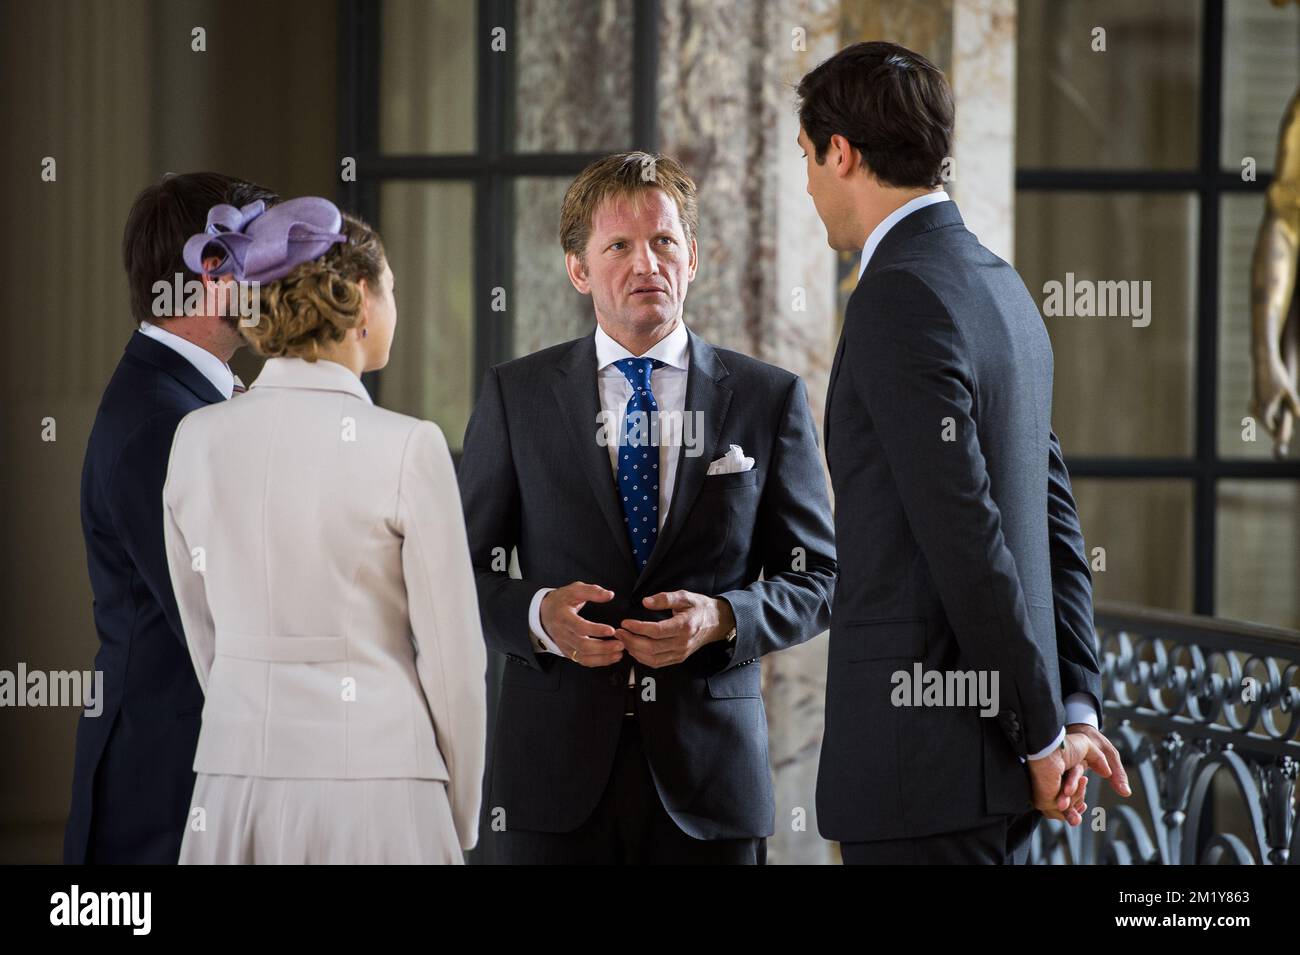 20150617 - BRUSSELS, BELGIUM: Prince Guillaume, hereditary Grand-Duke of Luxembourg, Belgian Countess Stephanie de Lannoy, Prince Pieter-Christiaan d'Orange-Nassau and Prince Jean-Christophe Napoleon pictured during a reception given by Belgian royal couple with Luxembourg hereditary Grand-Duke and descendants of the main war leaders of Waterloo battle, Wednesday 17 June 2015, at the Royal Castle in Laken-Laeken, Brussels. BELGA PHOTO LAURIE DIEFFEMBACQ Stock Photo